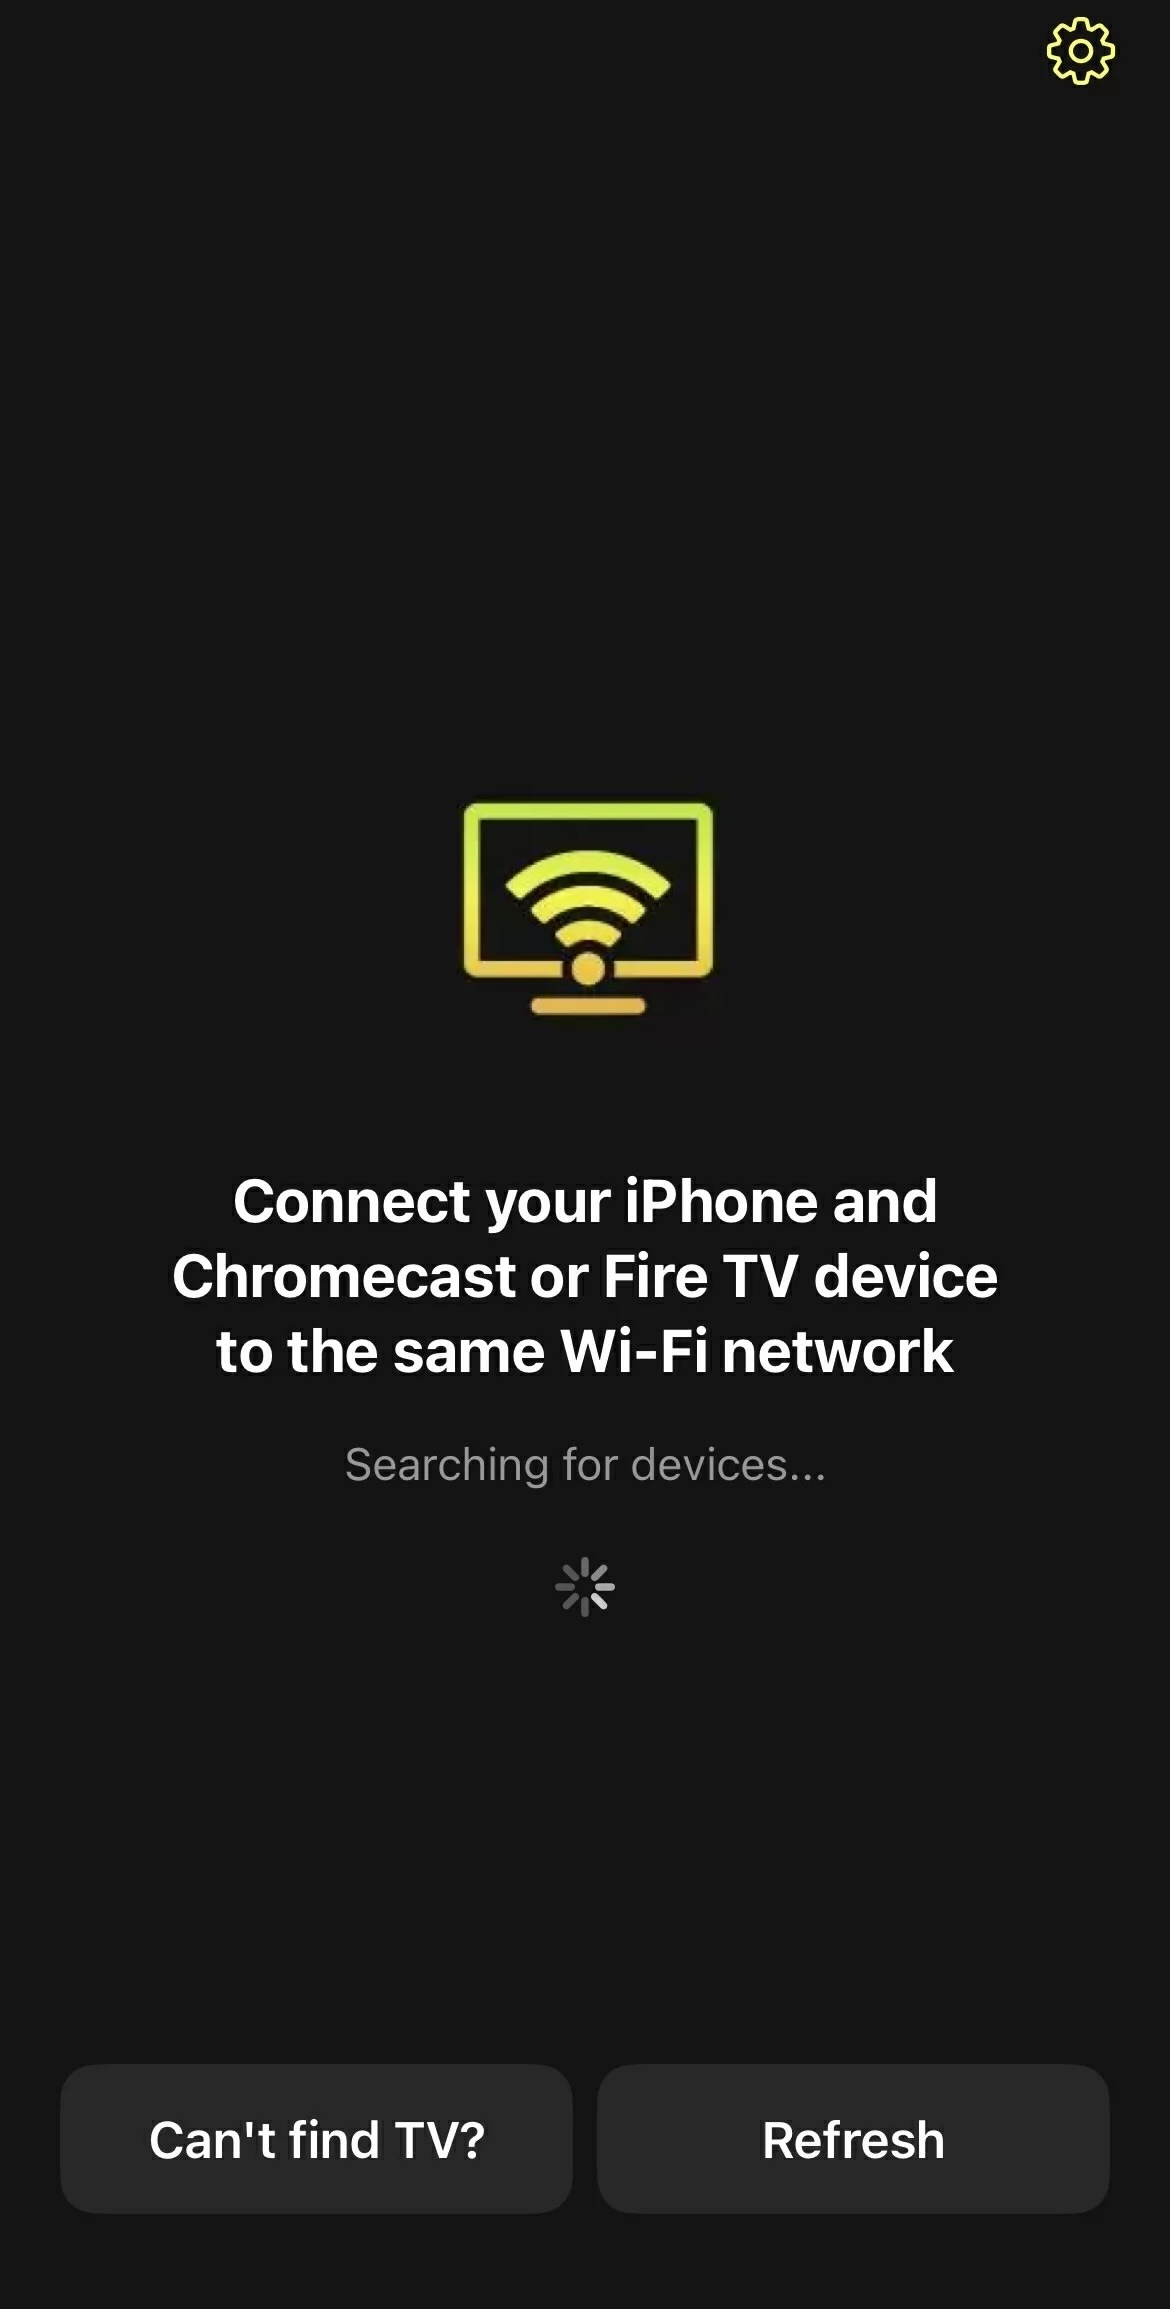 DoCast is searching for nearby Chromecast devices